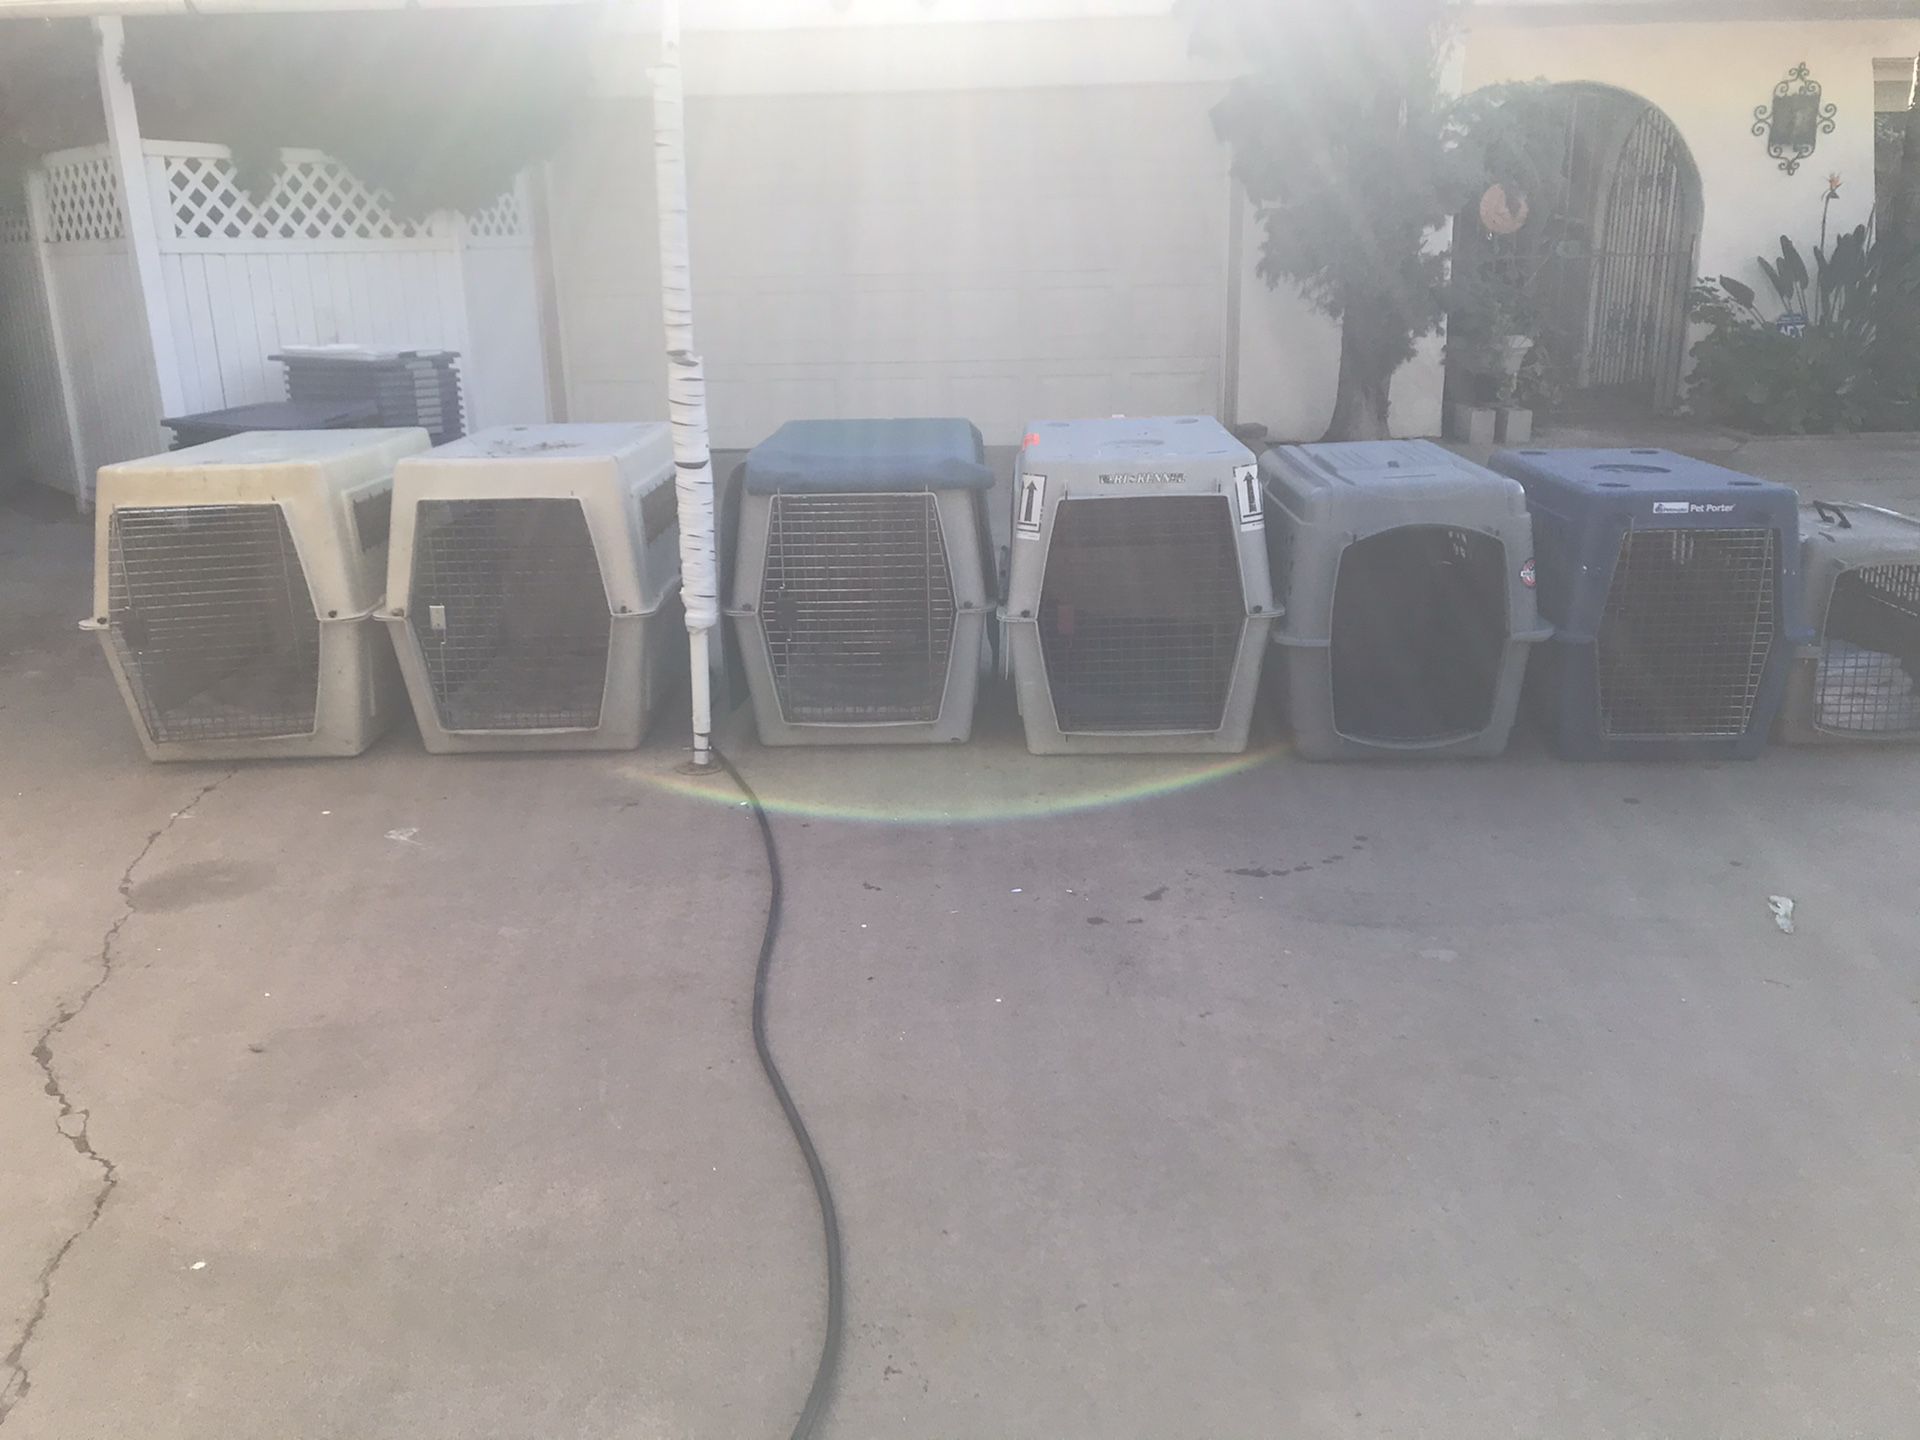 Dog kennel shipping crates used, all size is $25